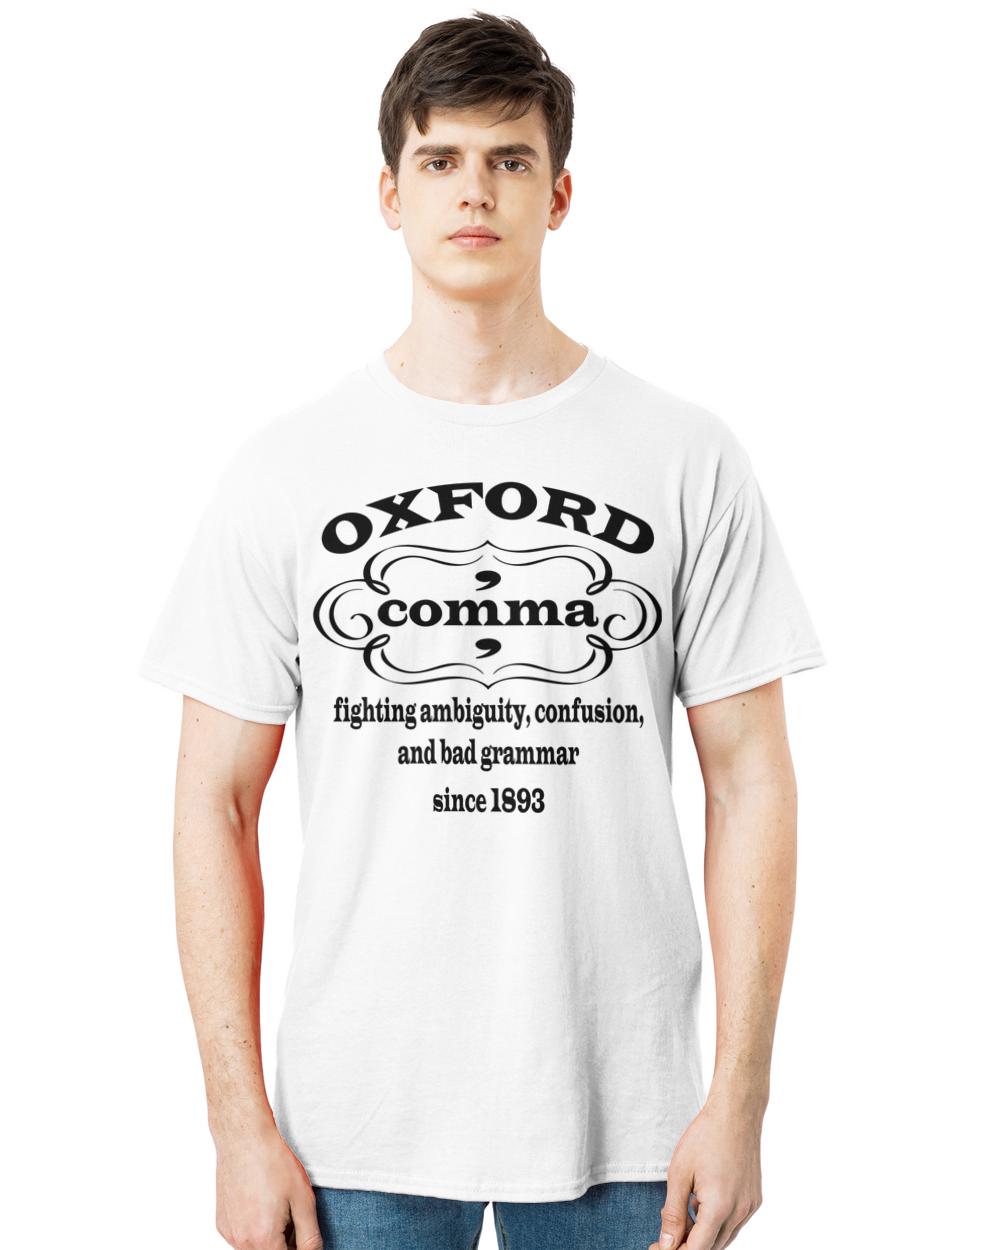 Oxford comma  fighting ambiguity confusion and bad grammar since  T-Shirt